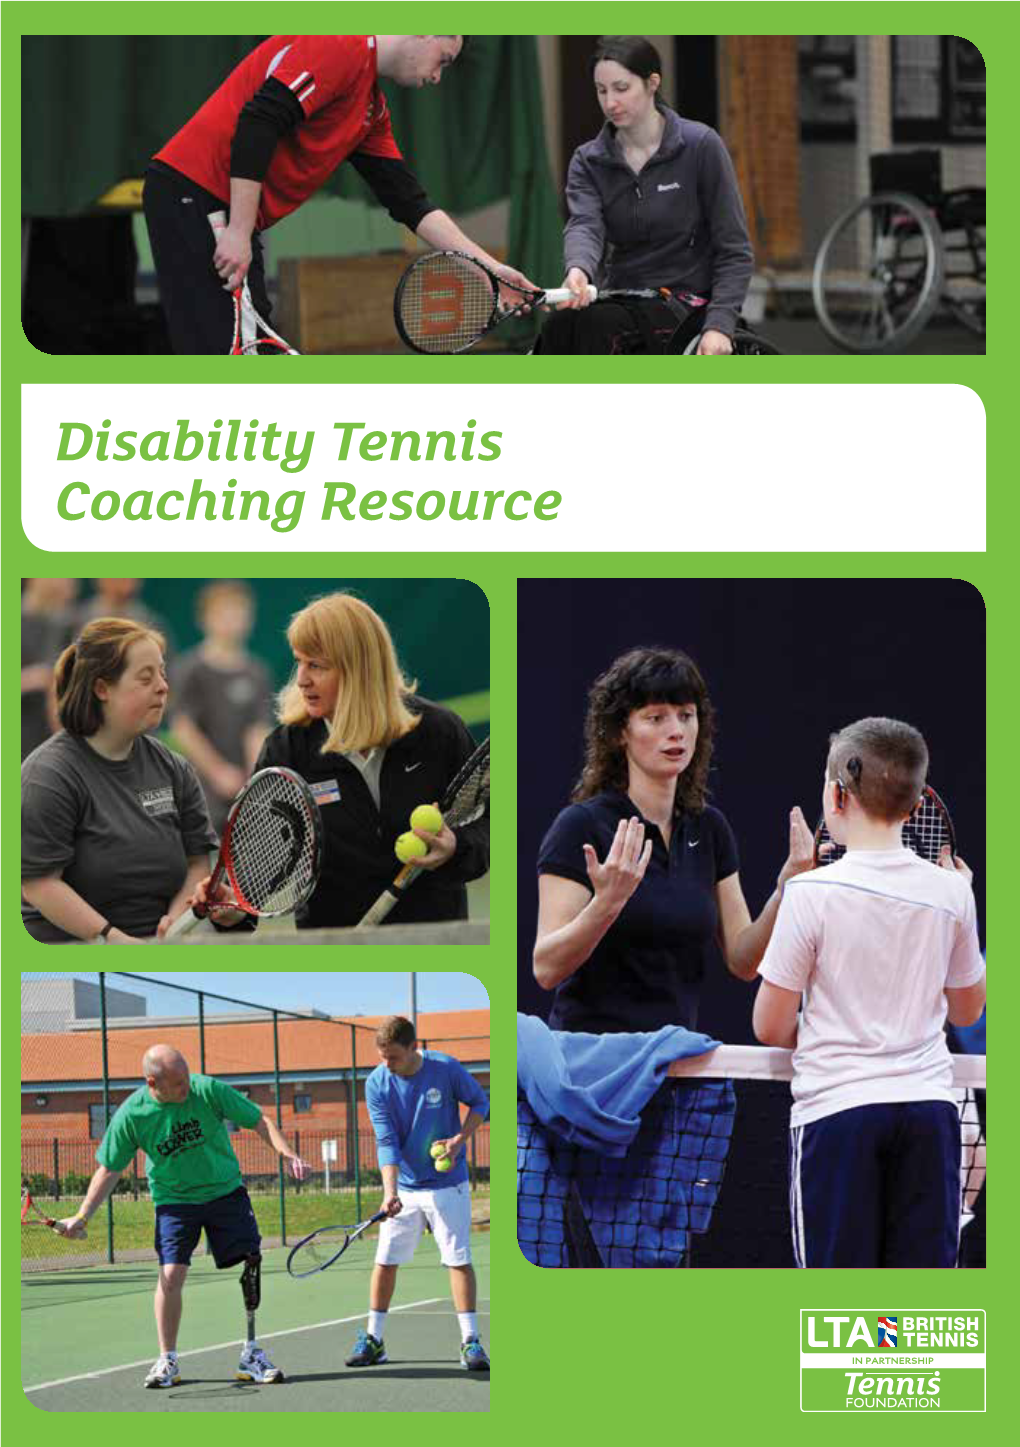 Disability Tennis Coaching Resource Disability Tennis Coaching Resource Disability Tennis Coaching Resource Contents